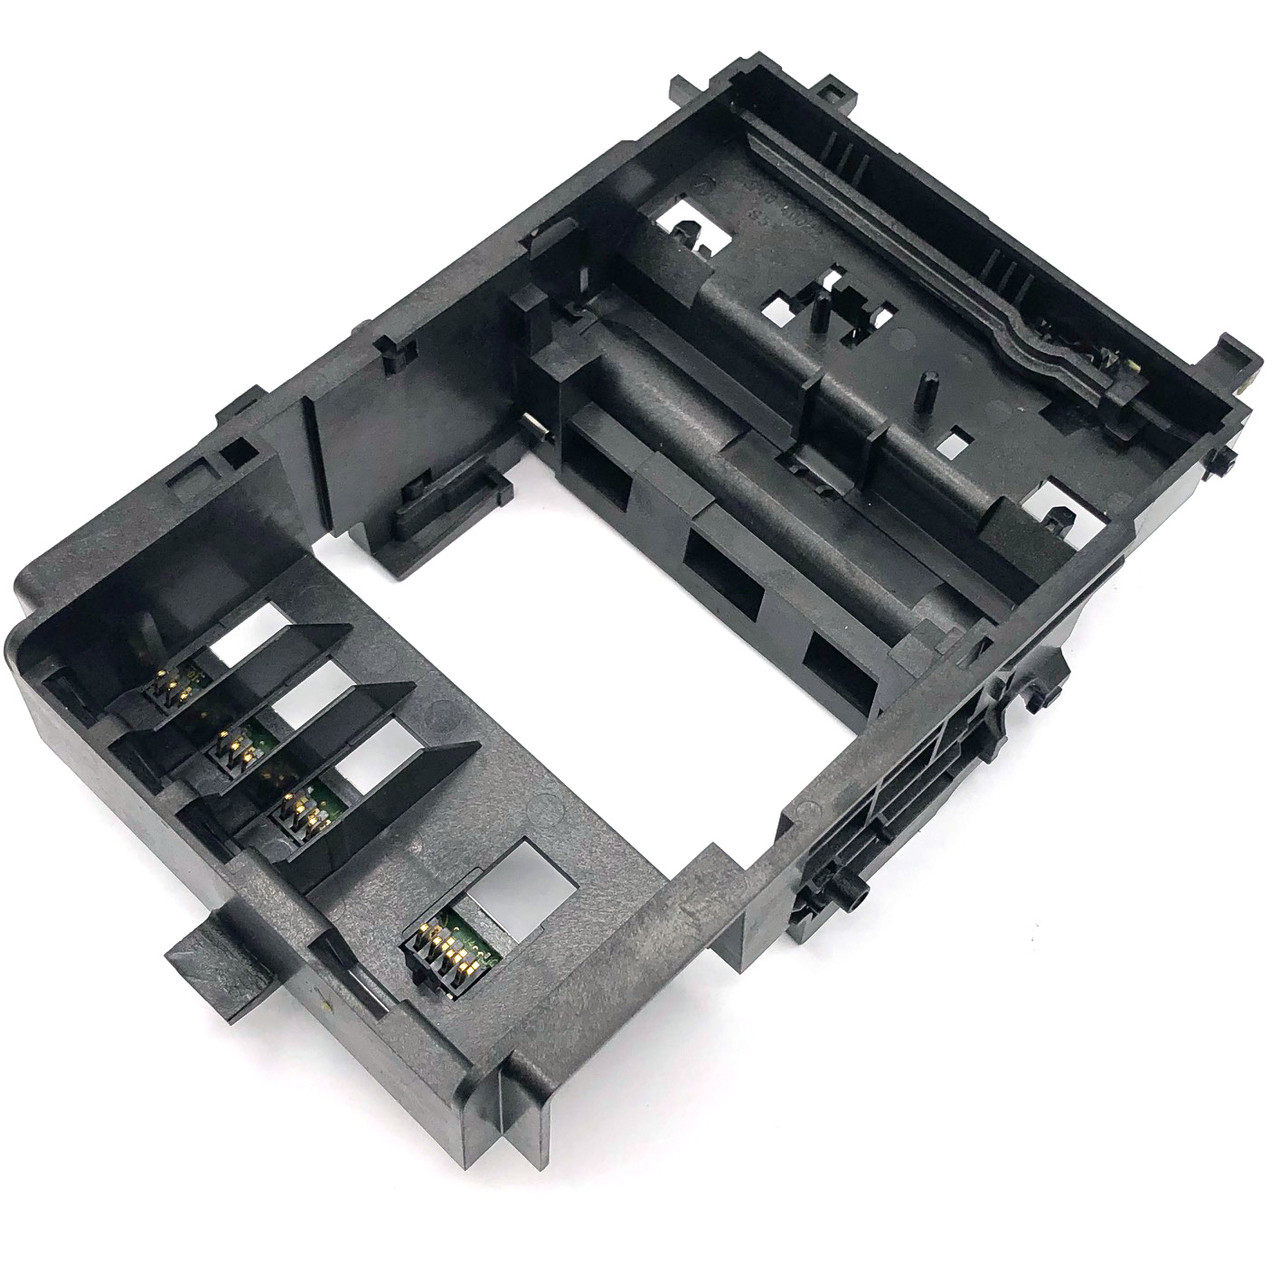 B6P40-40022 Printhead Carriage for HP OfficeJet Pro 8000 Series: 8022,  8025, 8028 All in one - BCH Technologies